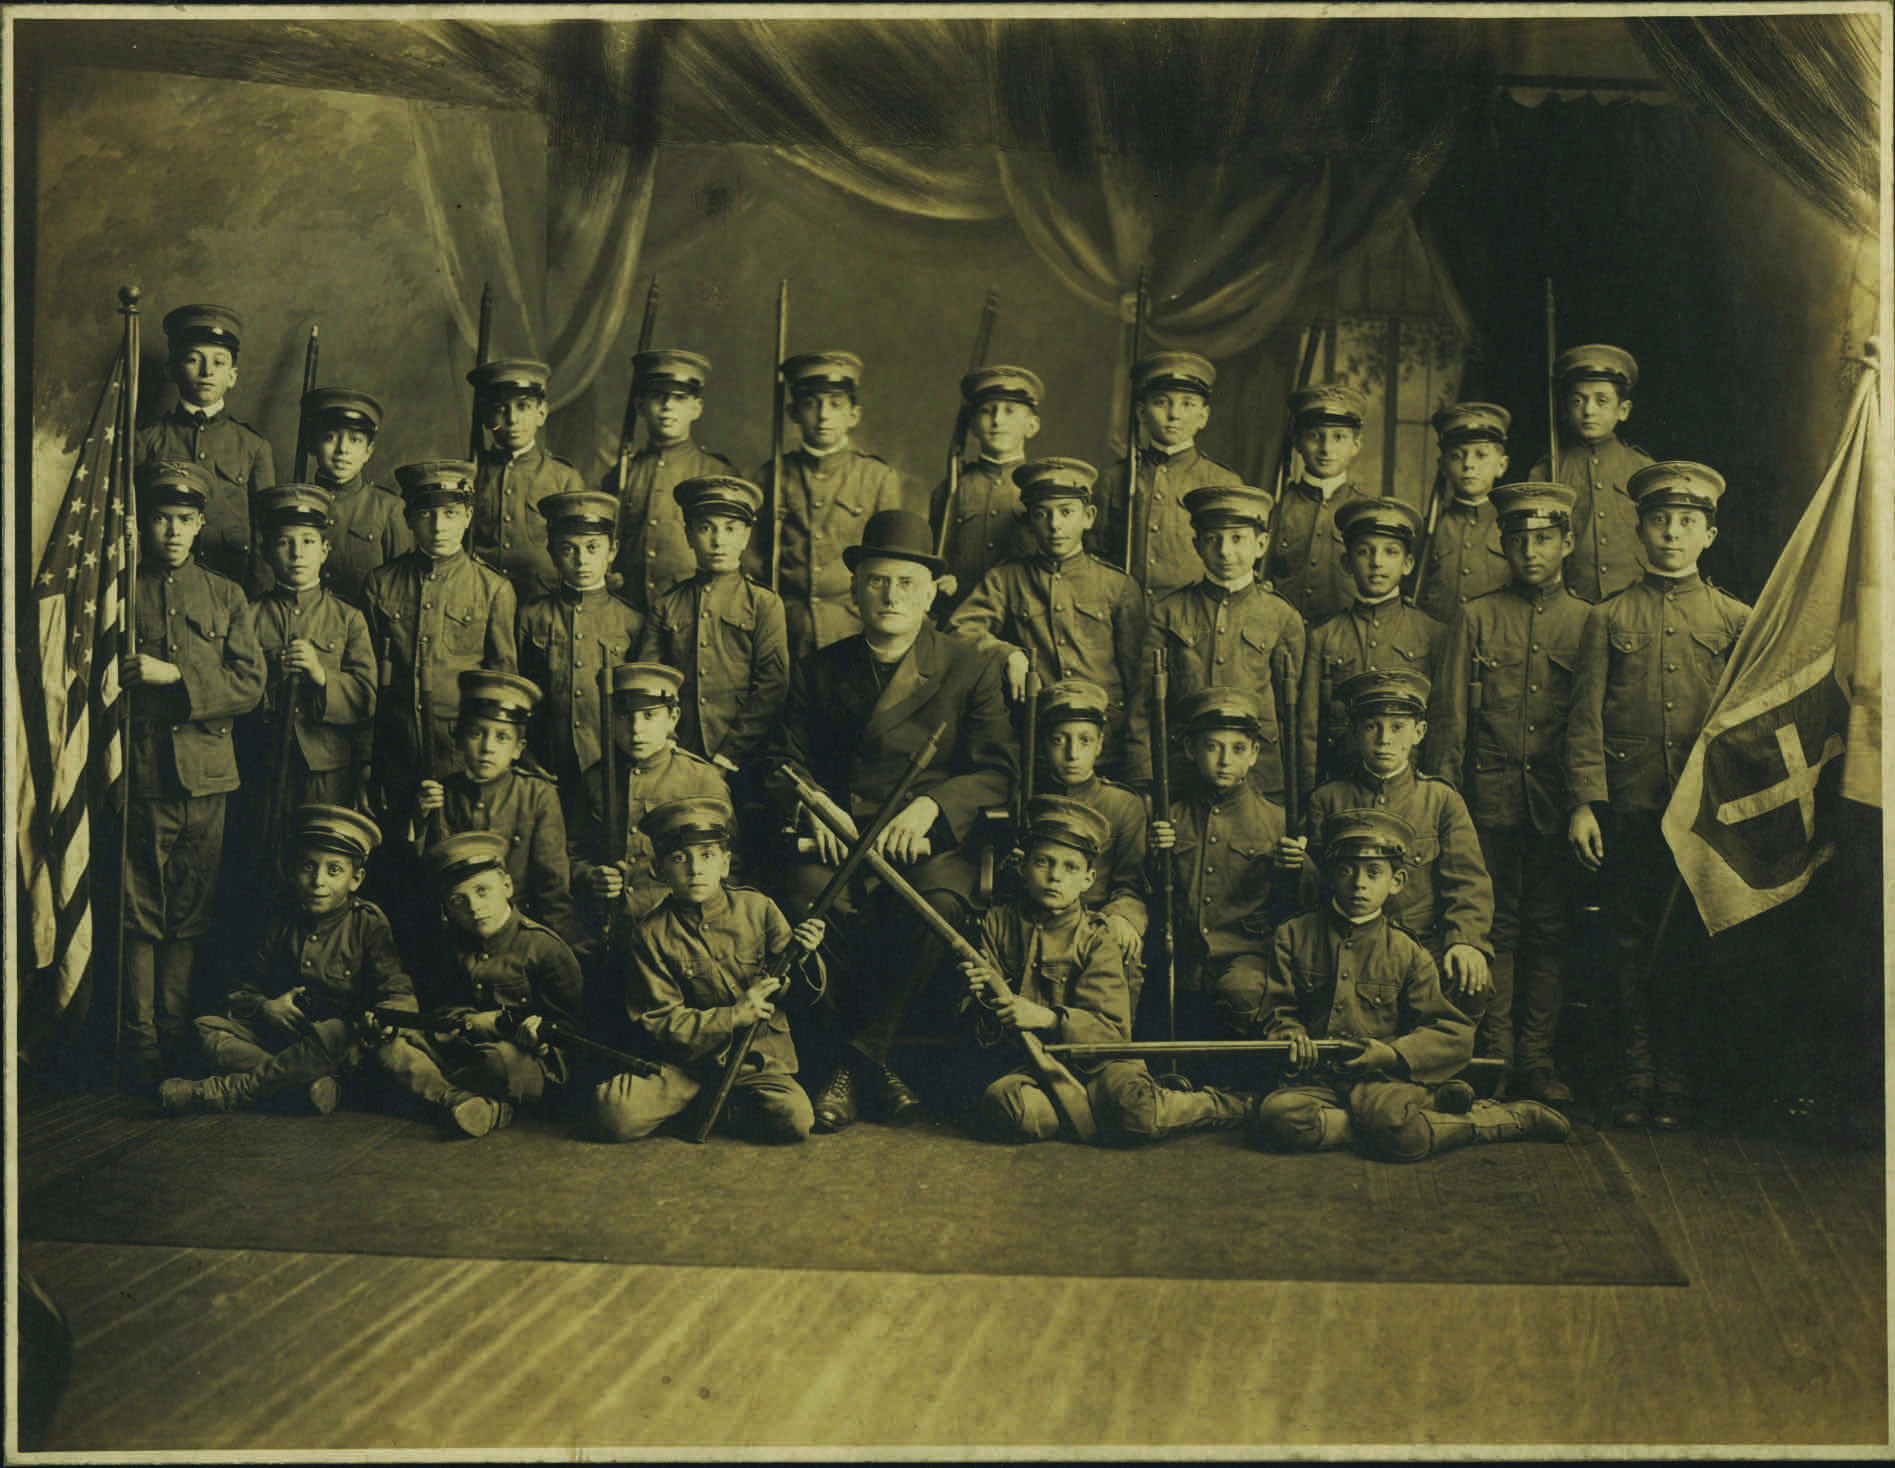 A group picture of the cadet club of St. Leo’s Church. Angelo Pente, here a young boy (seated third row from the top, far right), wrote later in life that they used the church basement as their training ground, remarking “it kept the youths out of trouble.”  